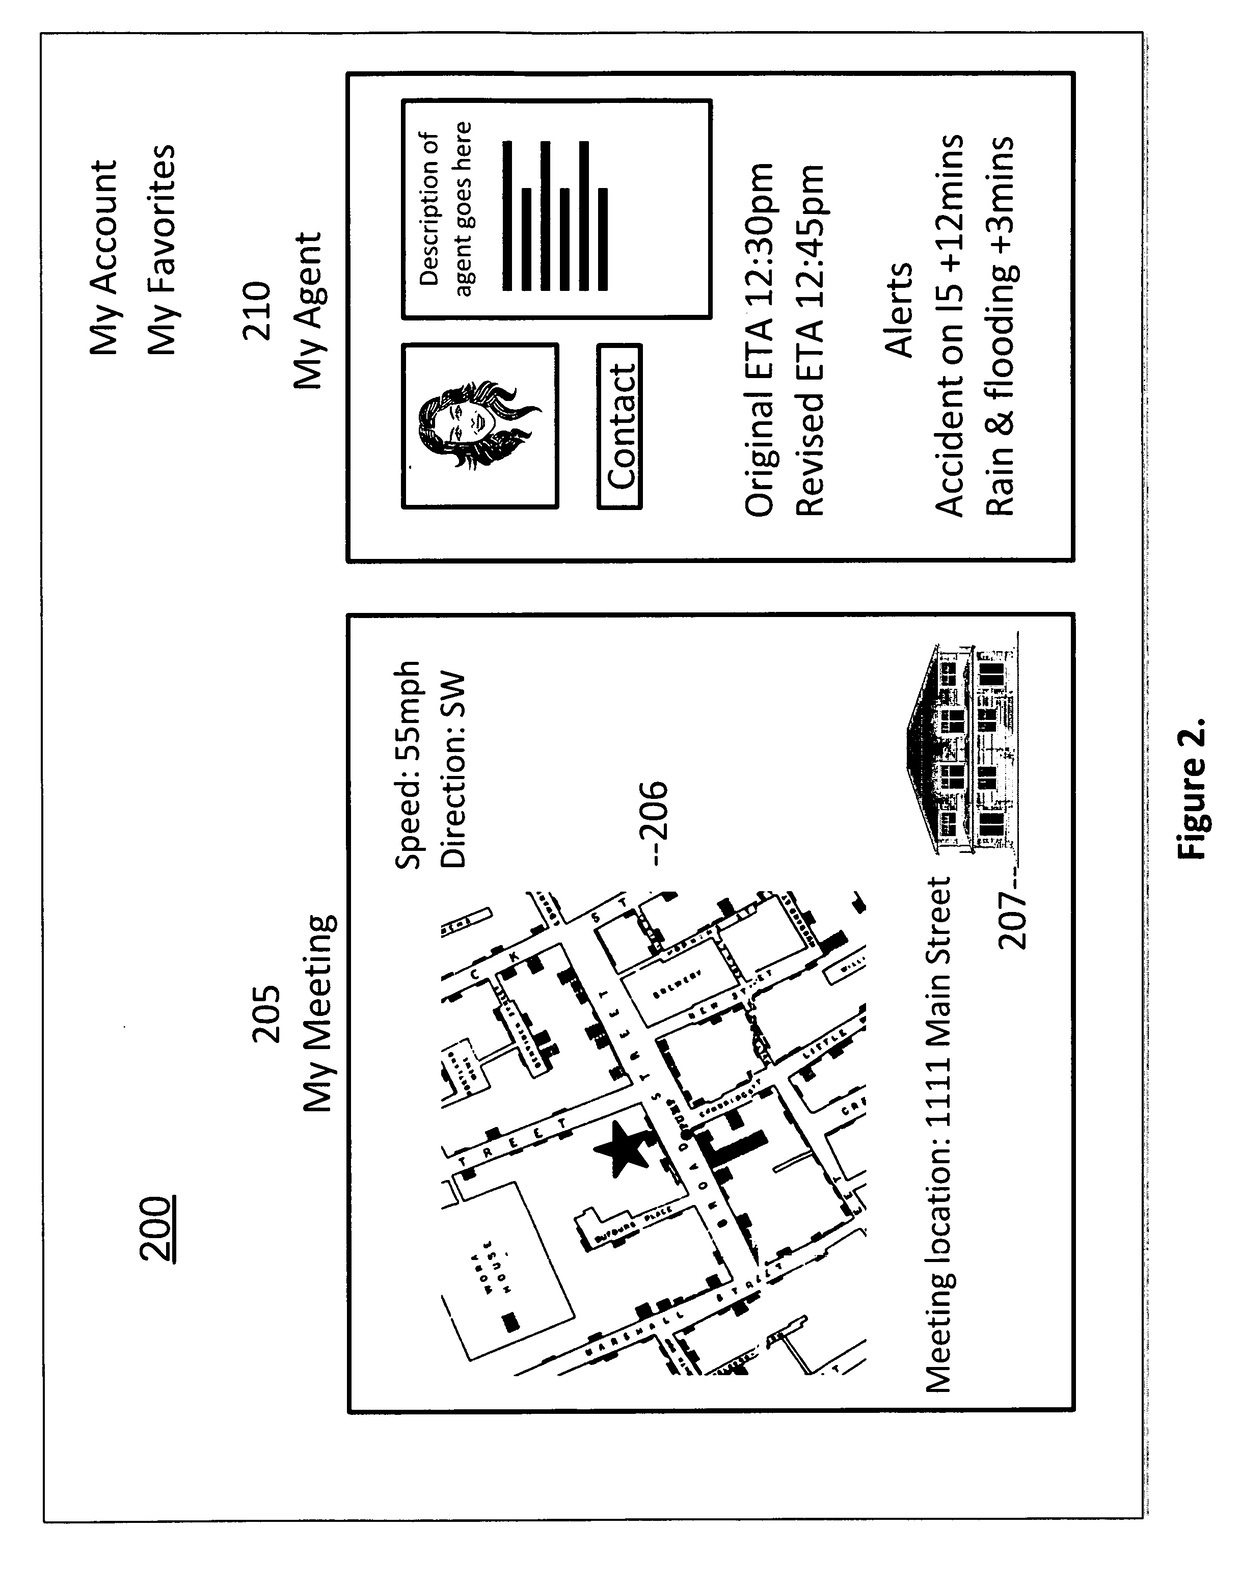 Method and Systems for Providing On-demand Real Estate Related Products and Services